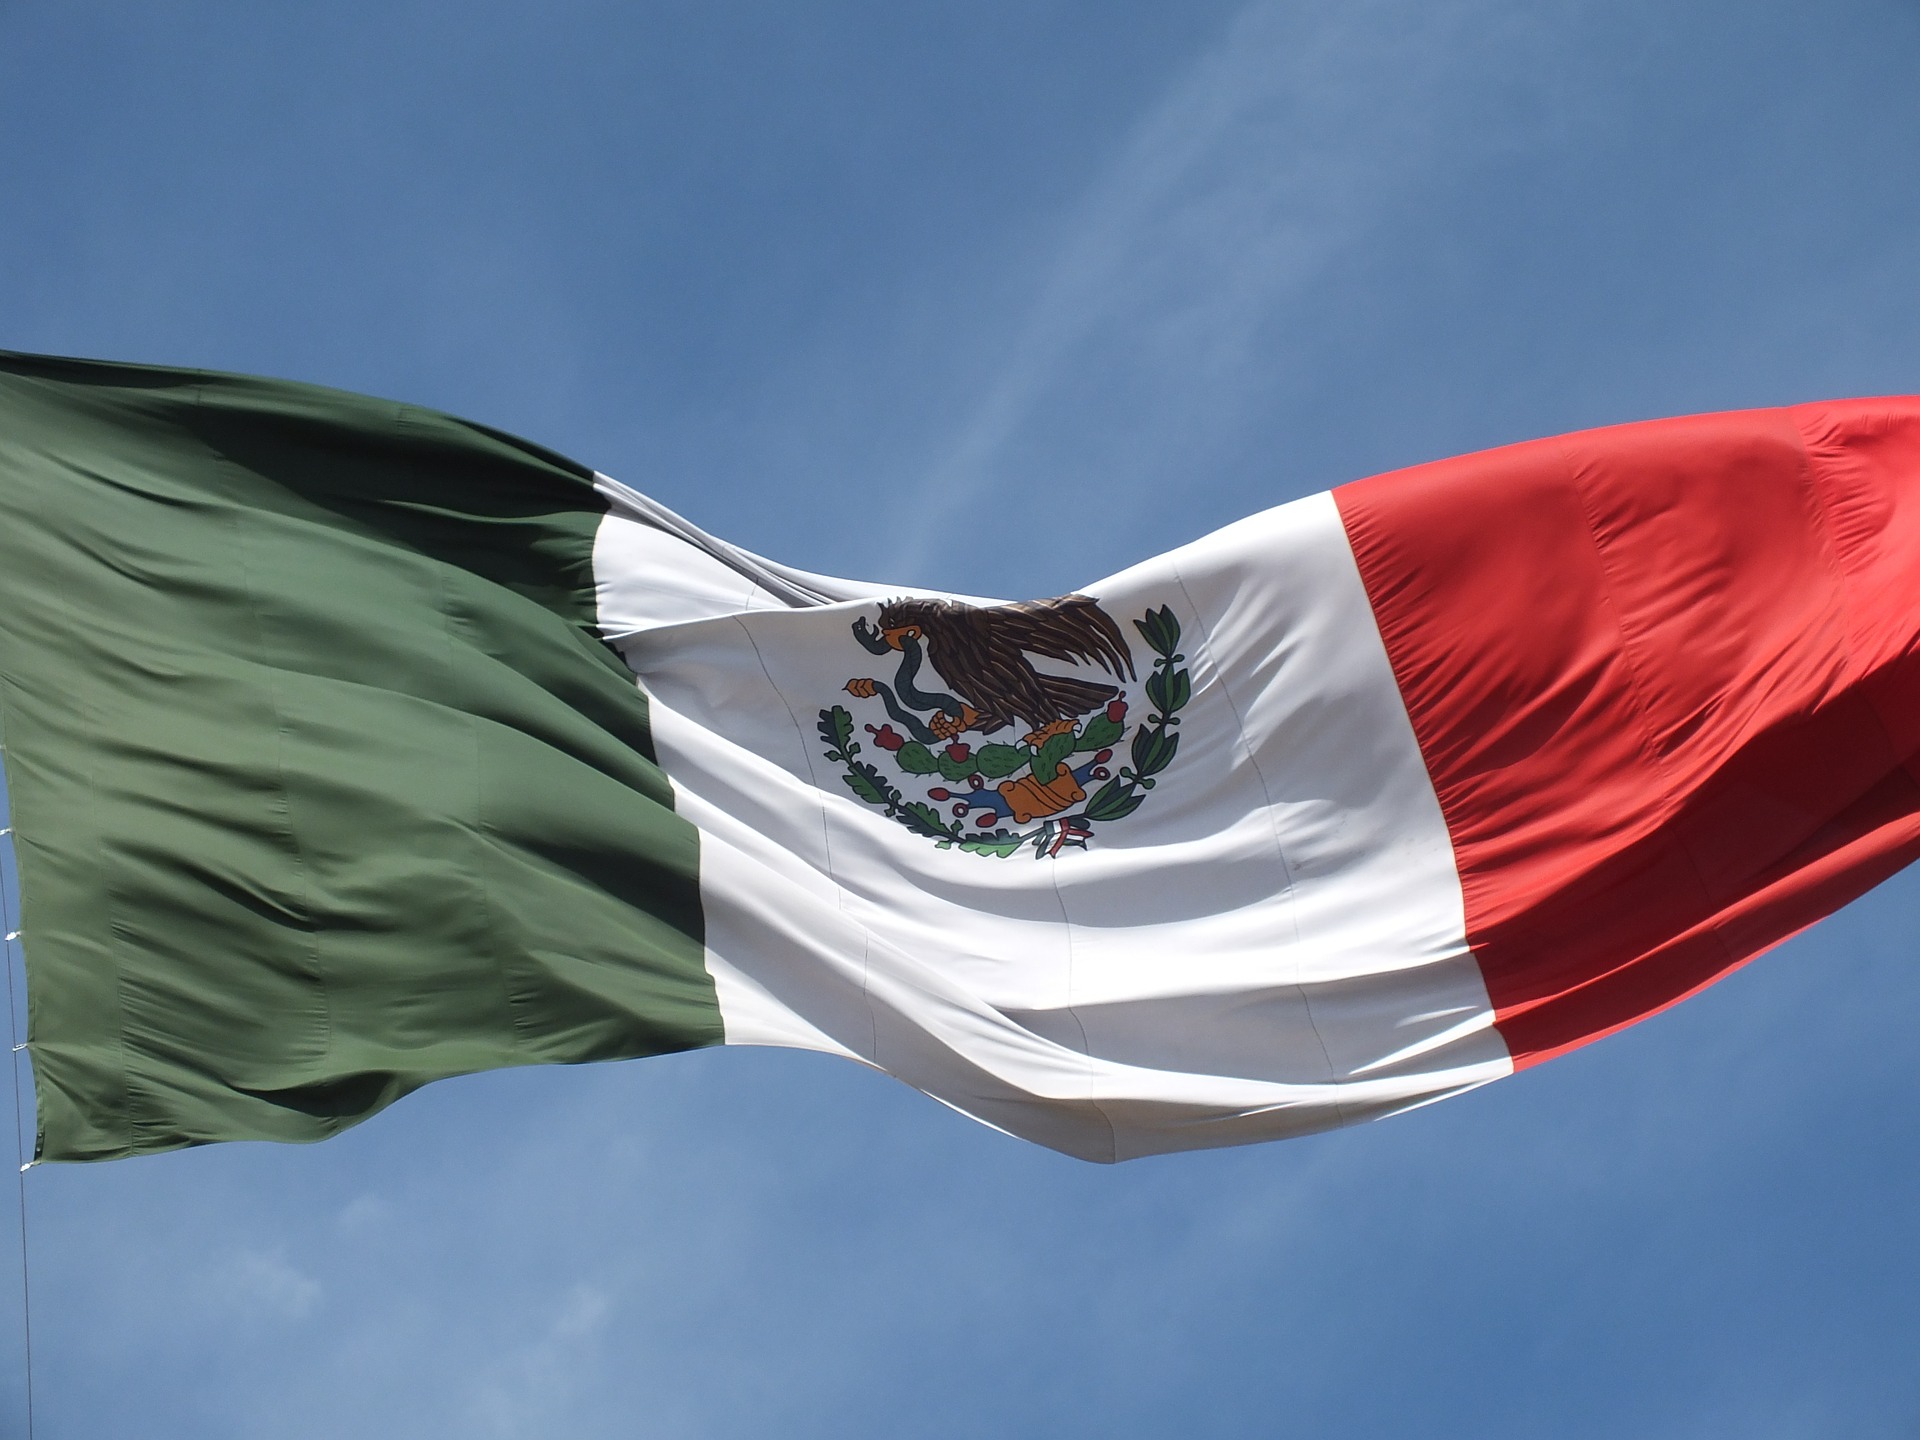 Employment Outlook: Mexico